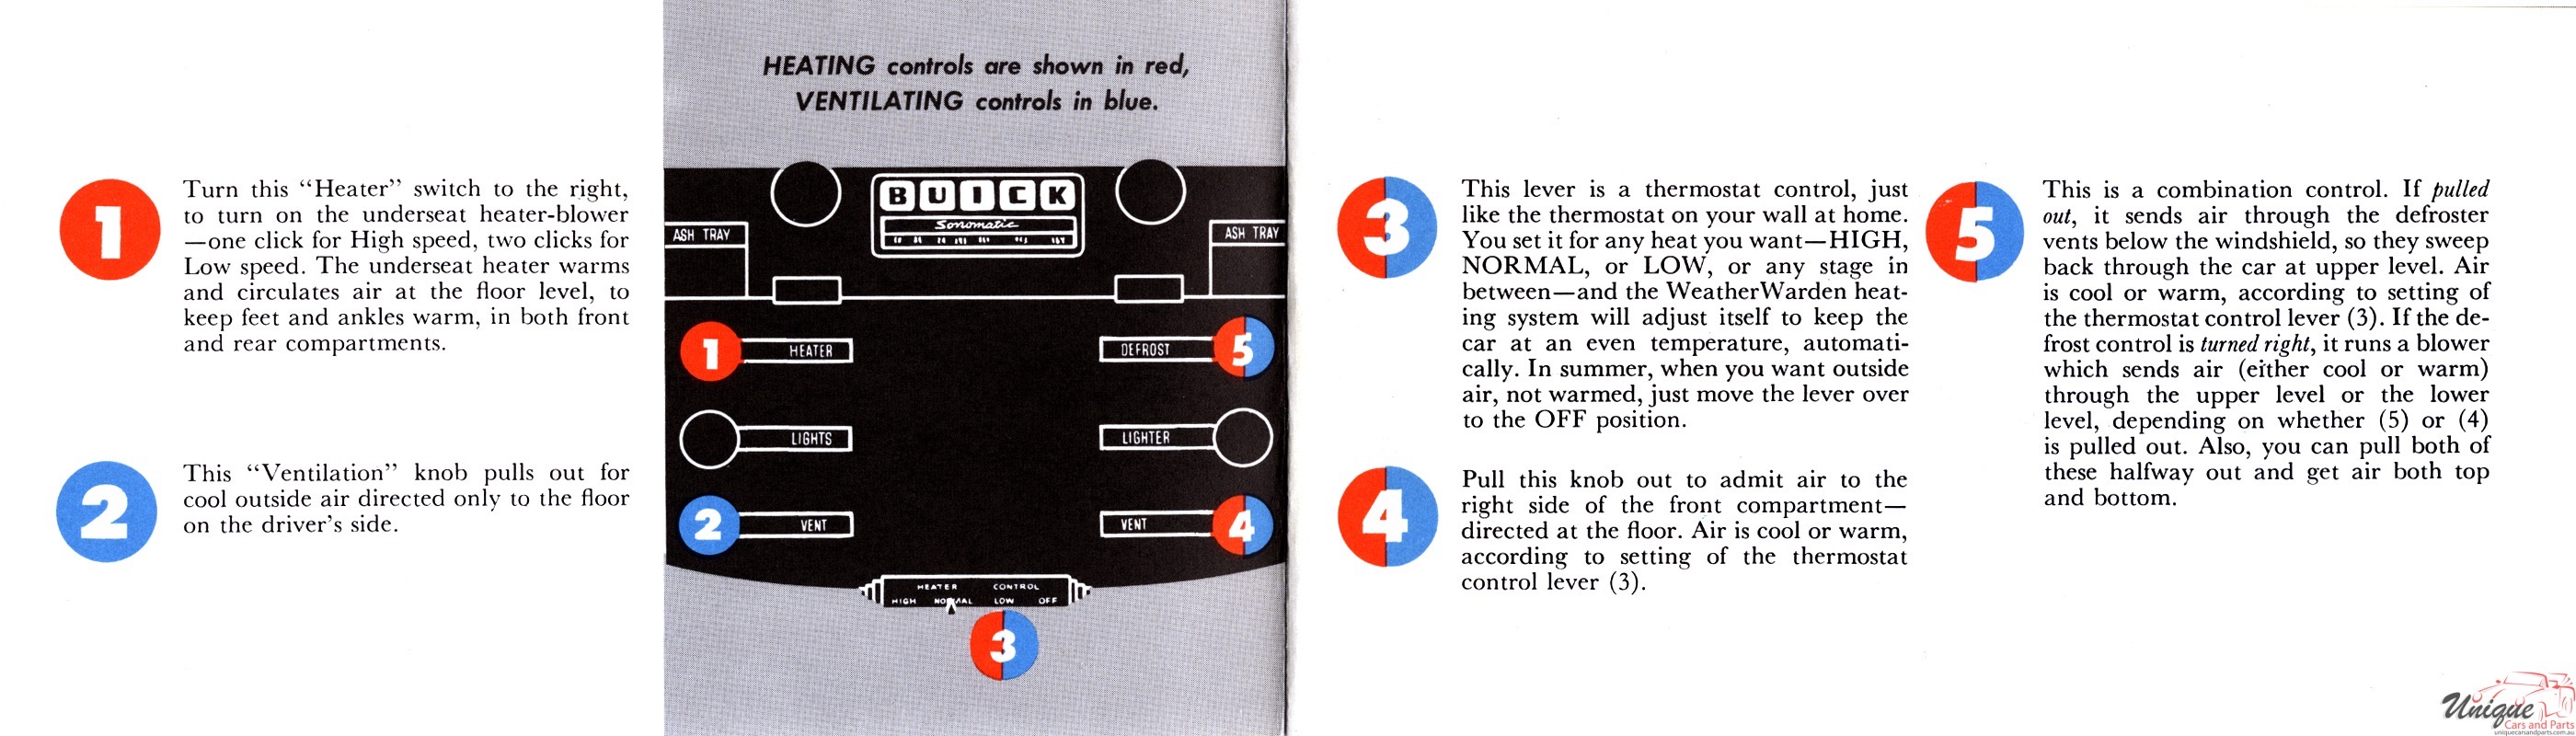 1953 Buick Heating And Air-Conditioning Folder Page 3